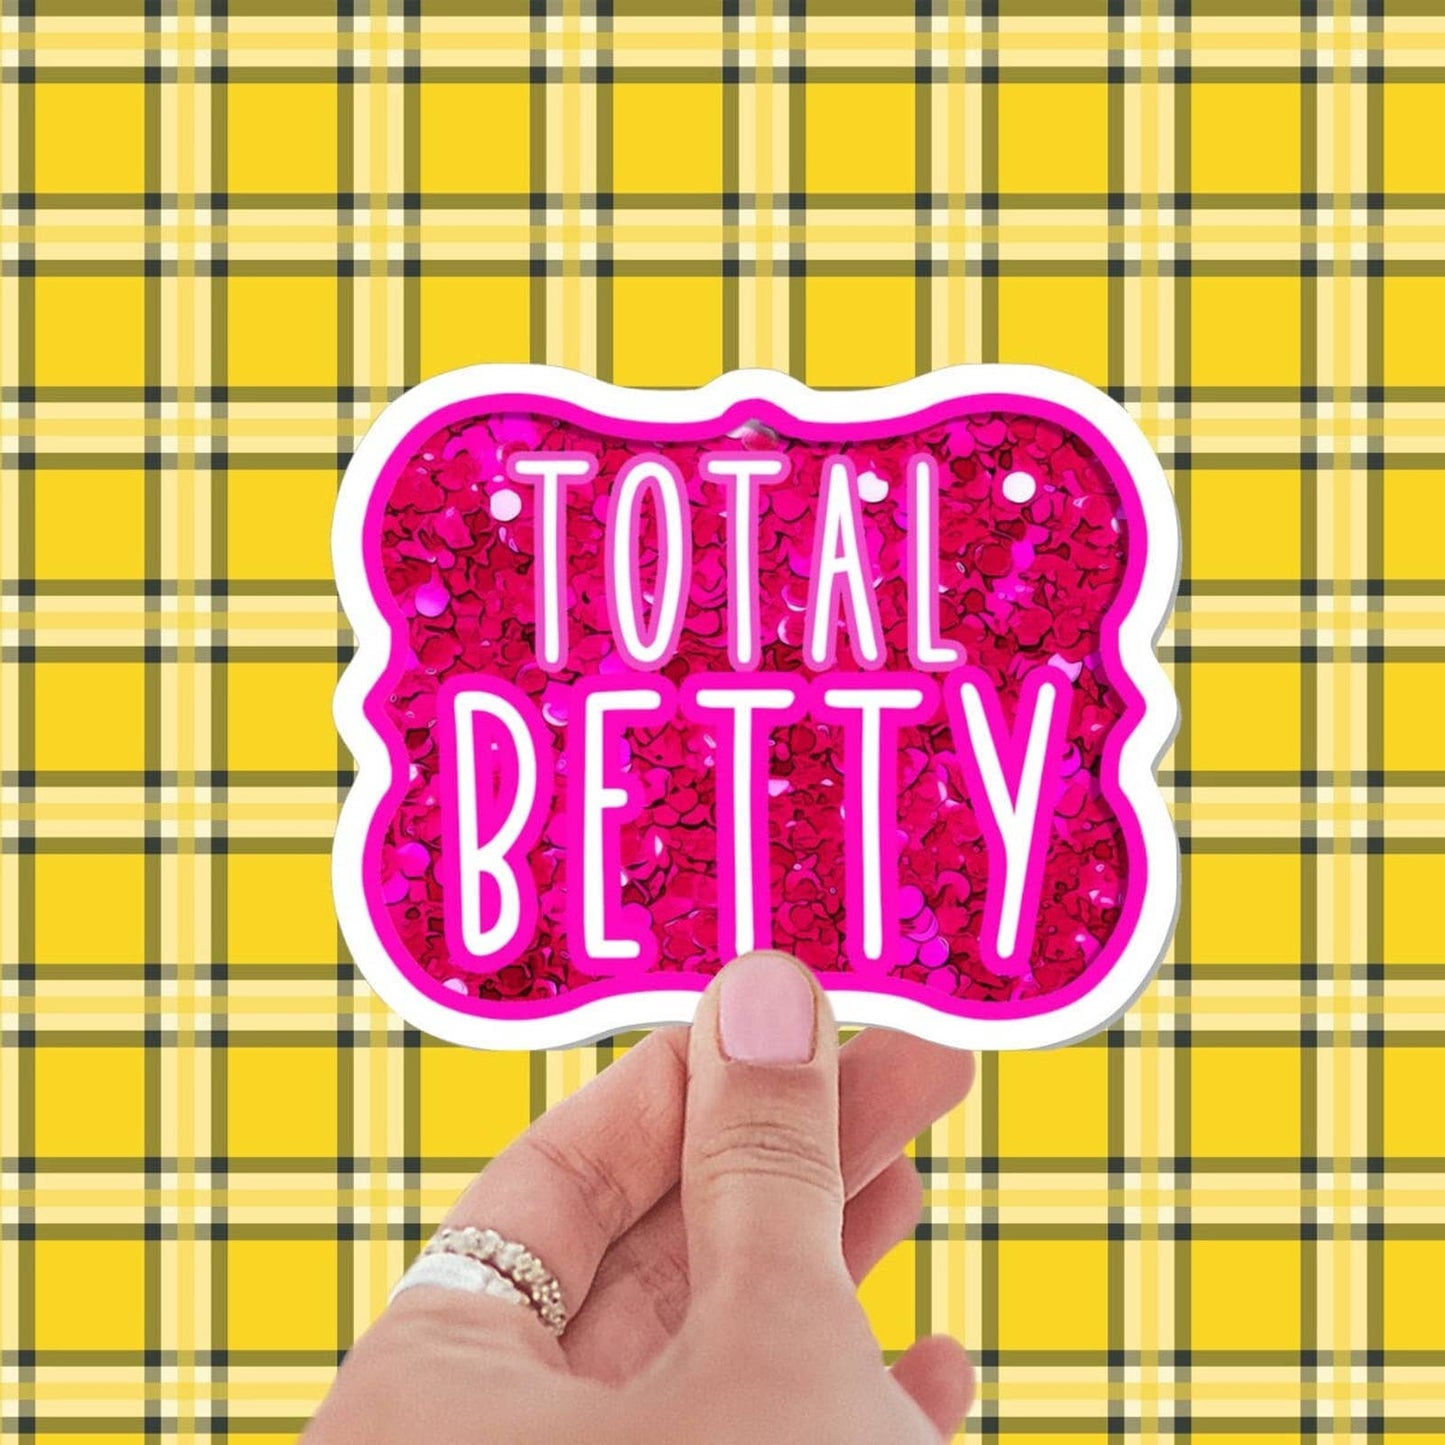 Total Betty sticker, funny stickers, stickers for laptop, stickers for book, 90s stickers, water bottle stickers, aesthetic stickers